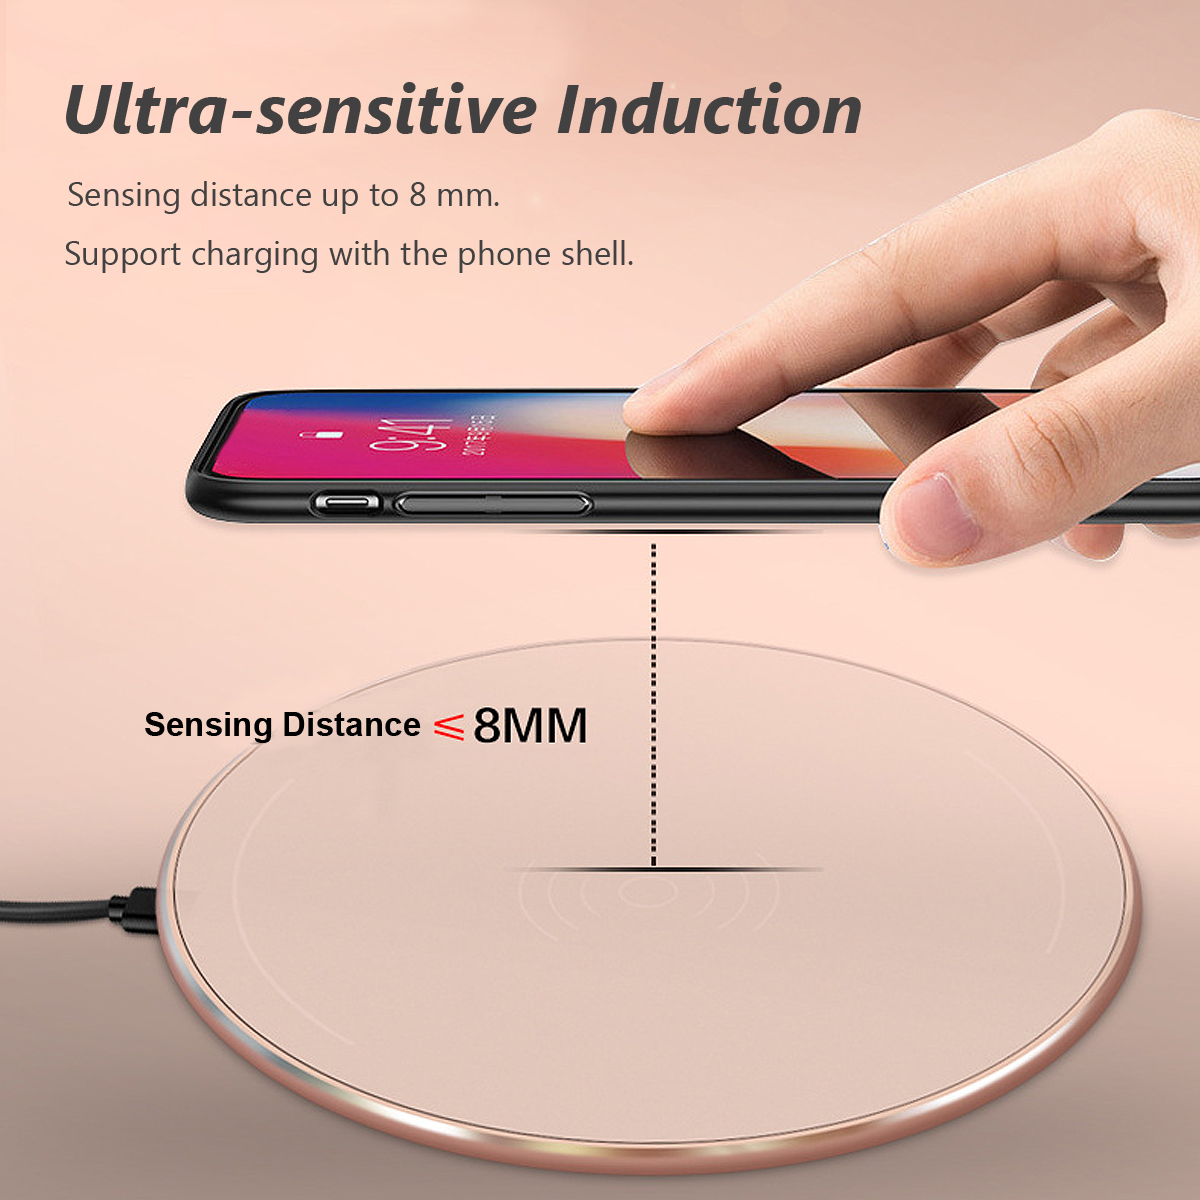 Bakeey 10W Metal Scrub QI wireless Fast Charging Charger Pad For iPhoneX 8/8Plus Samsung S8 iwatch 3